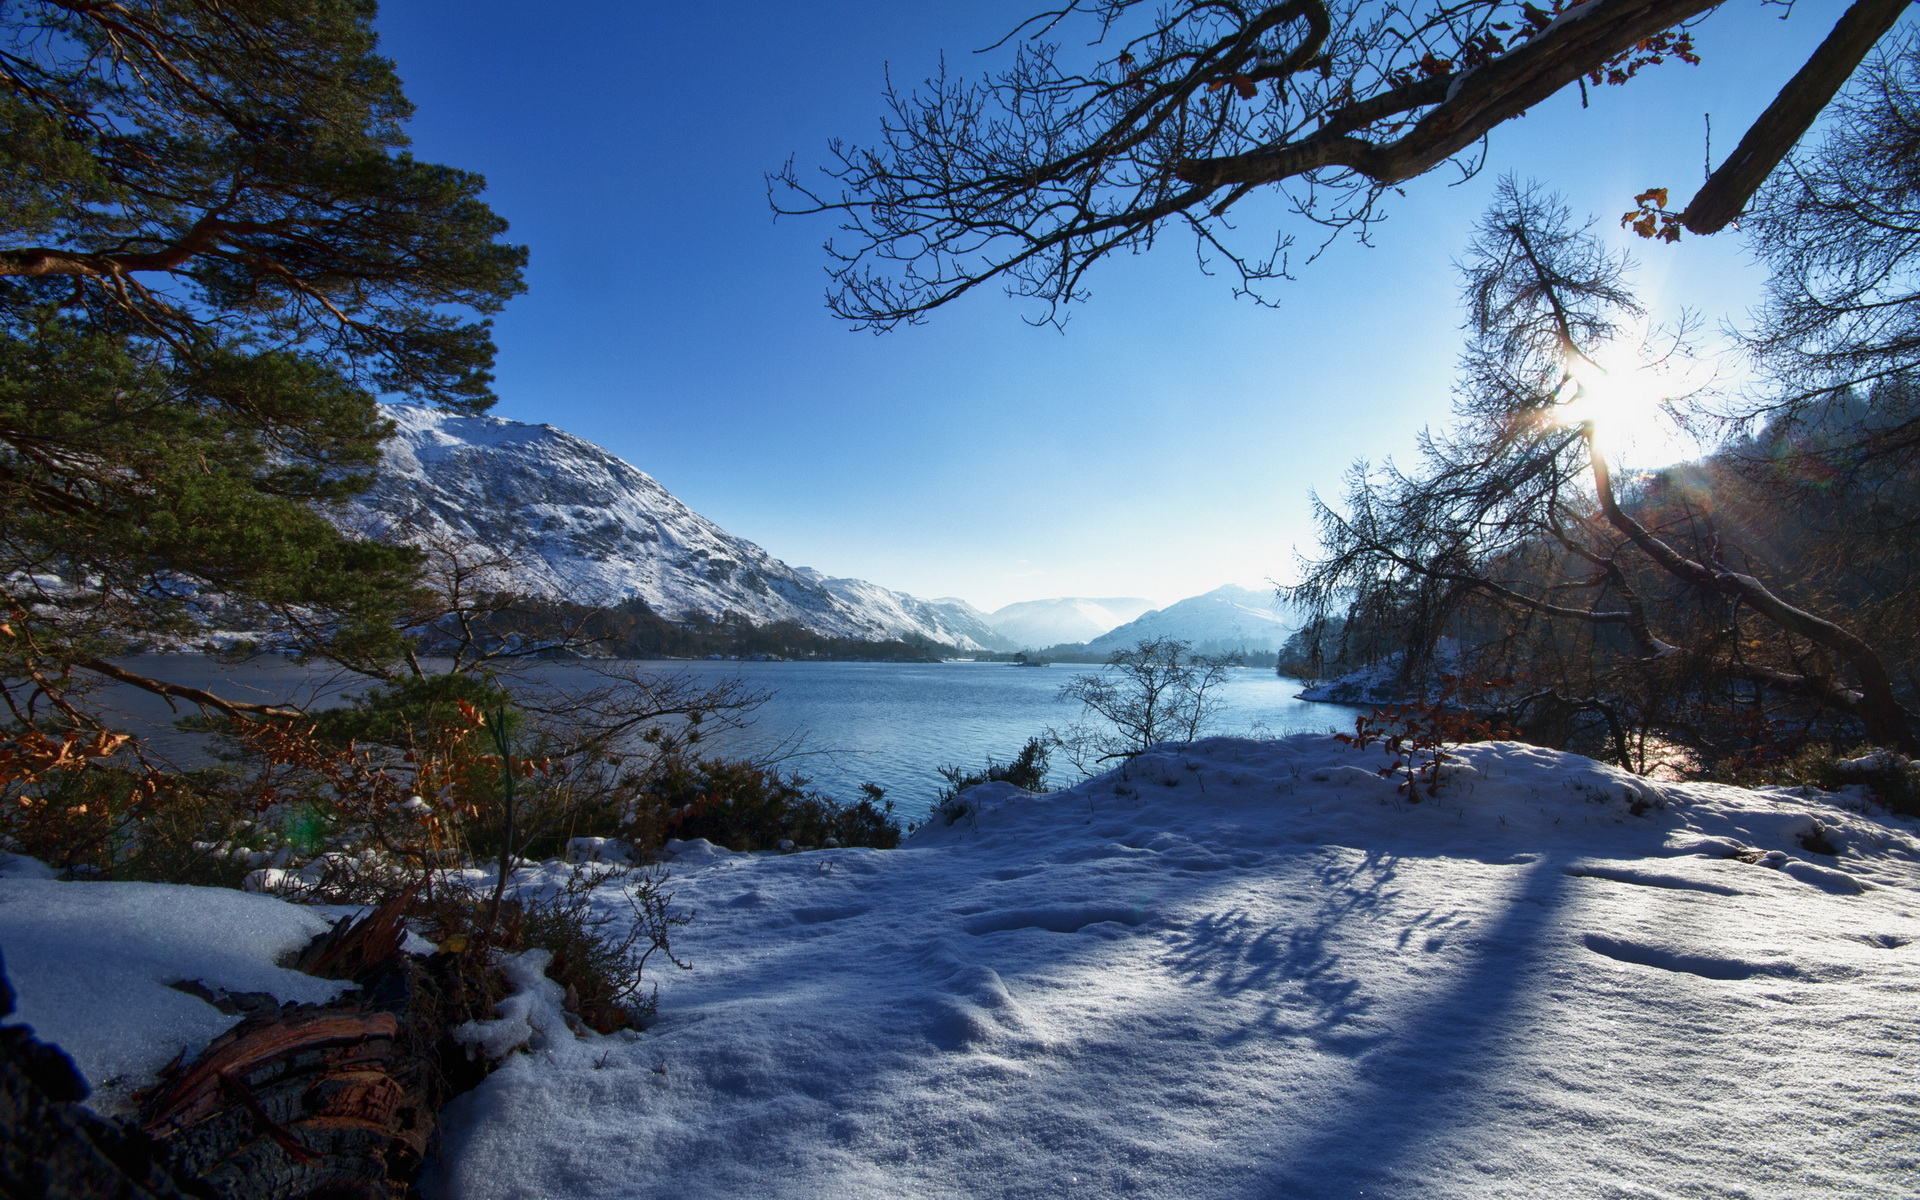 Winter Landscape wallpapers and images - wallpapers, pictures, photos